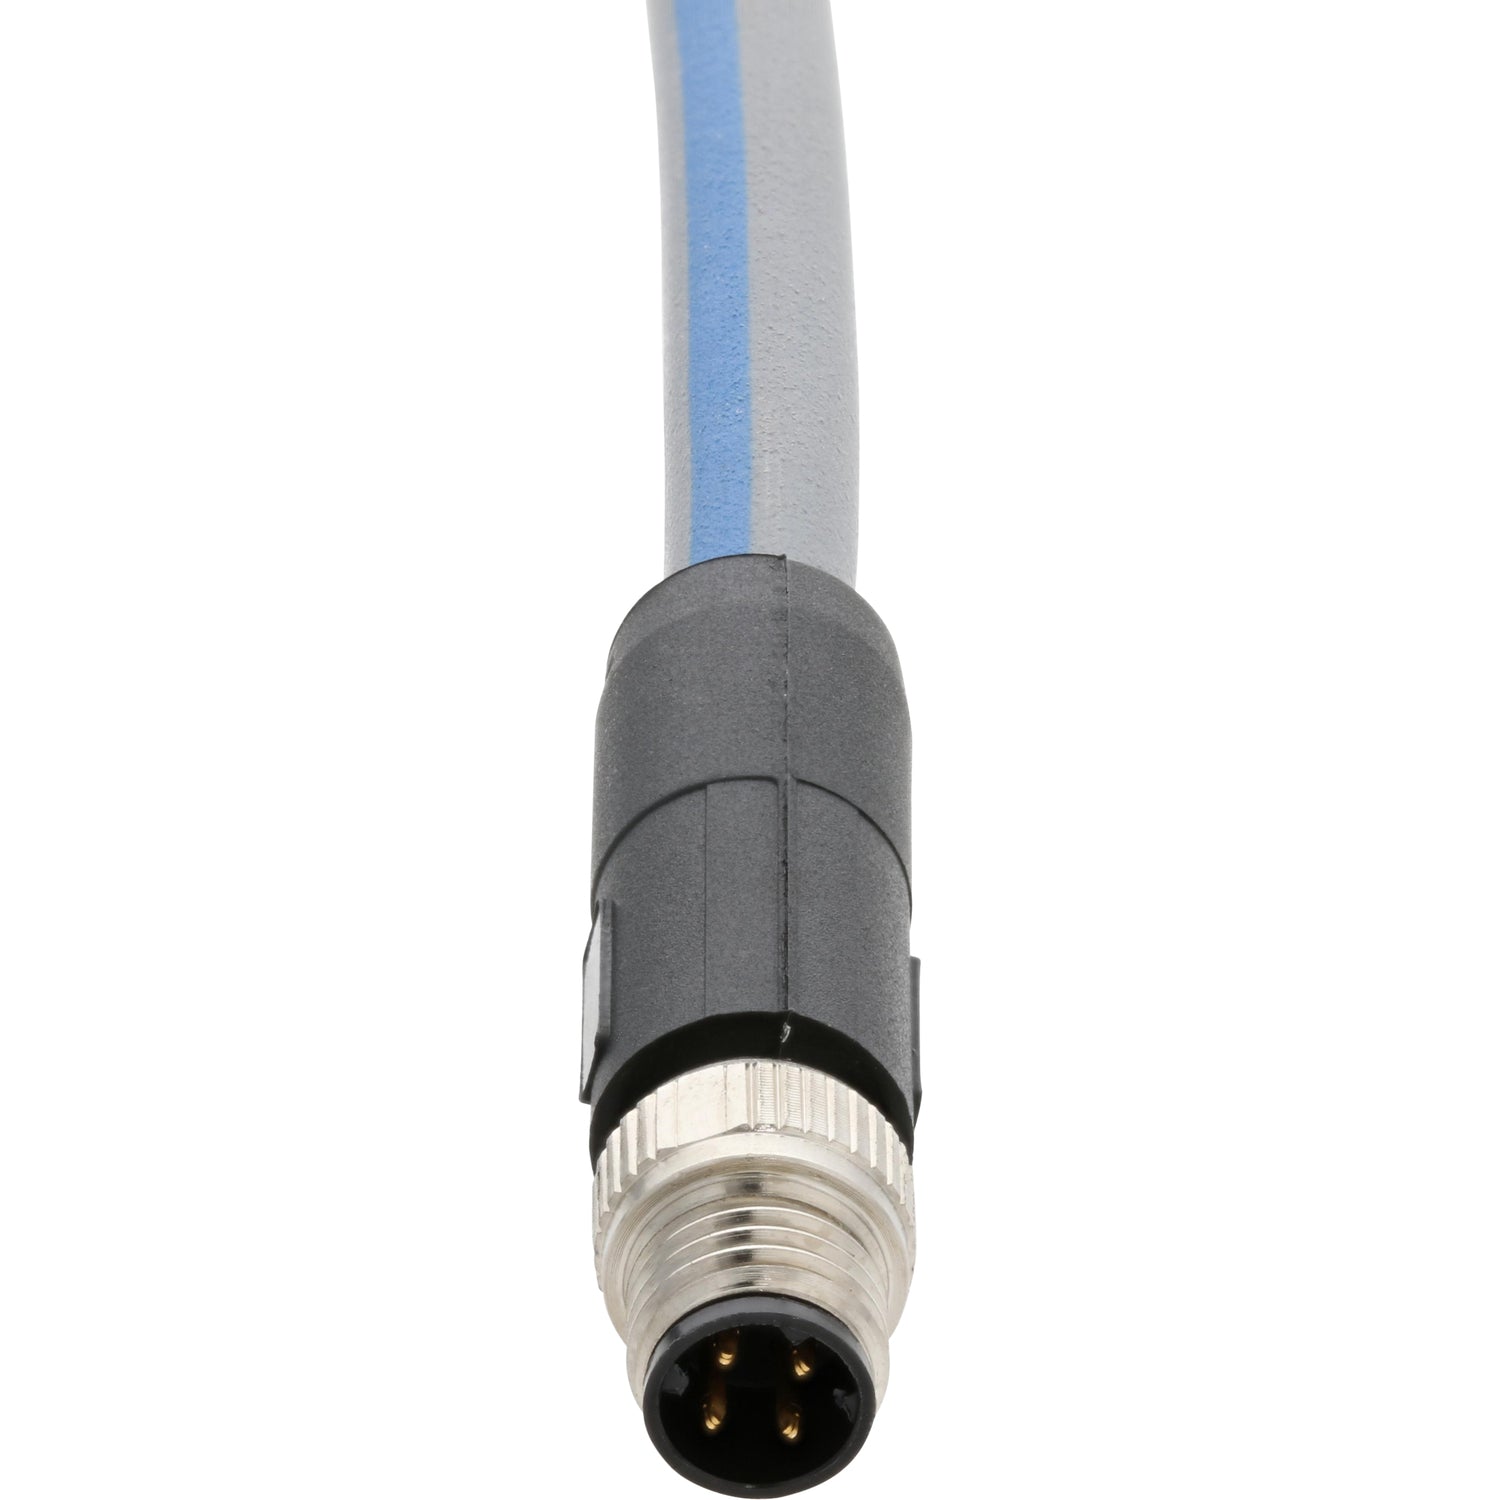 Blue and grey connecting cable with nickel plated four pin male connector on white background.